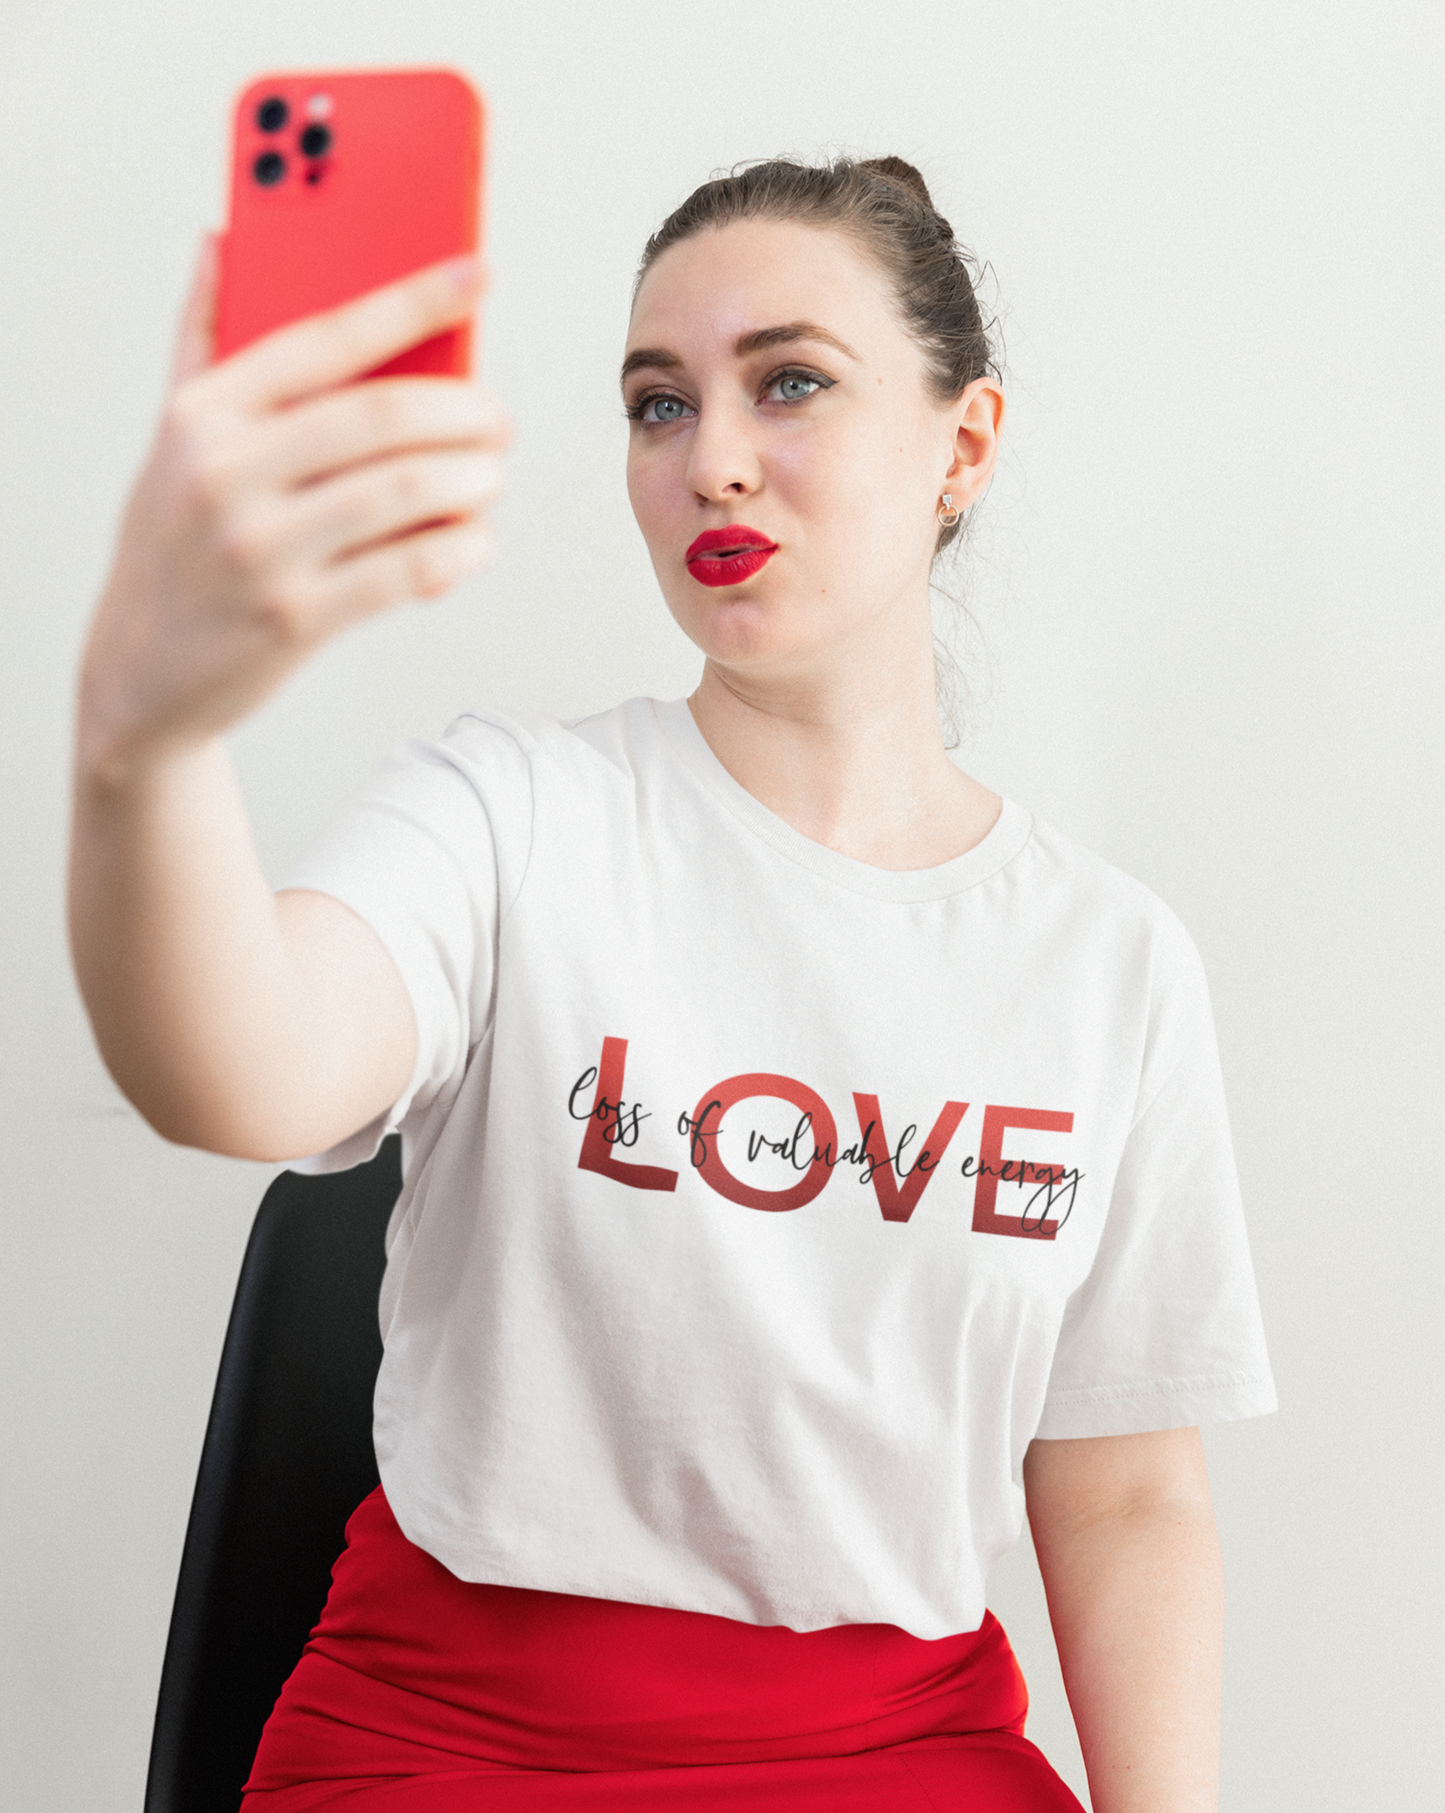 LOVE - Loss of Valuable Energy! Am I Right? This cotton t-shirt is perfect for sitting at home drinking wine while being skeptical of love! Say what all us single people are thinking with this t-shirt!